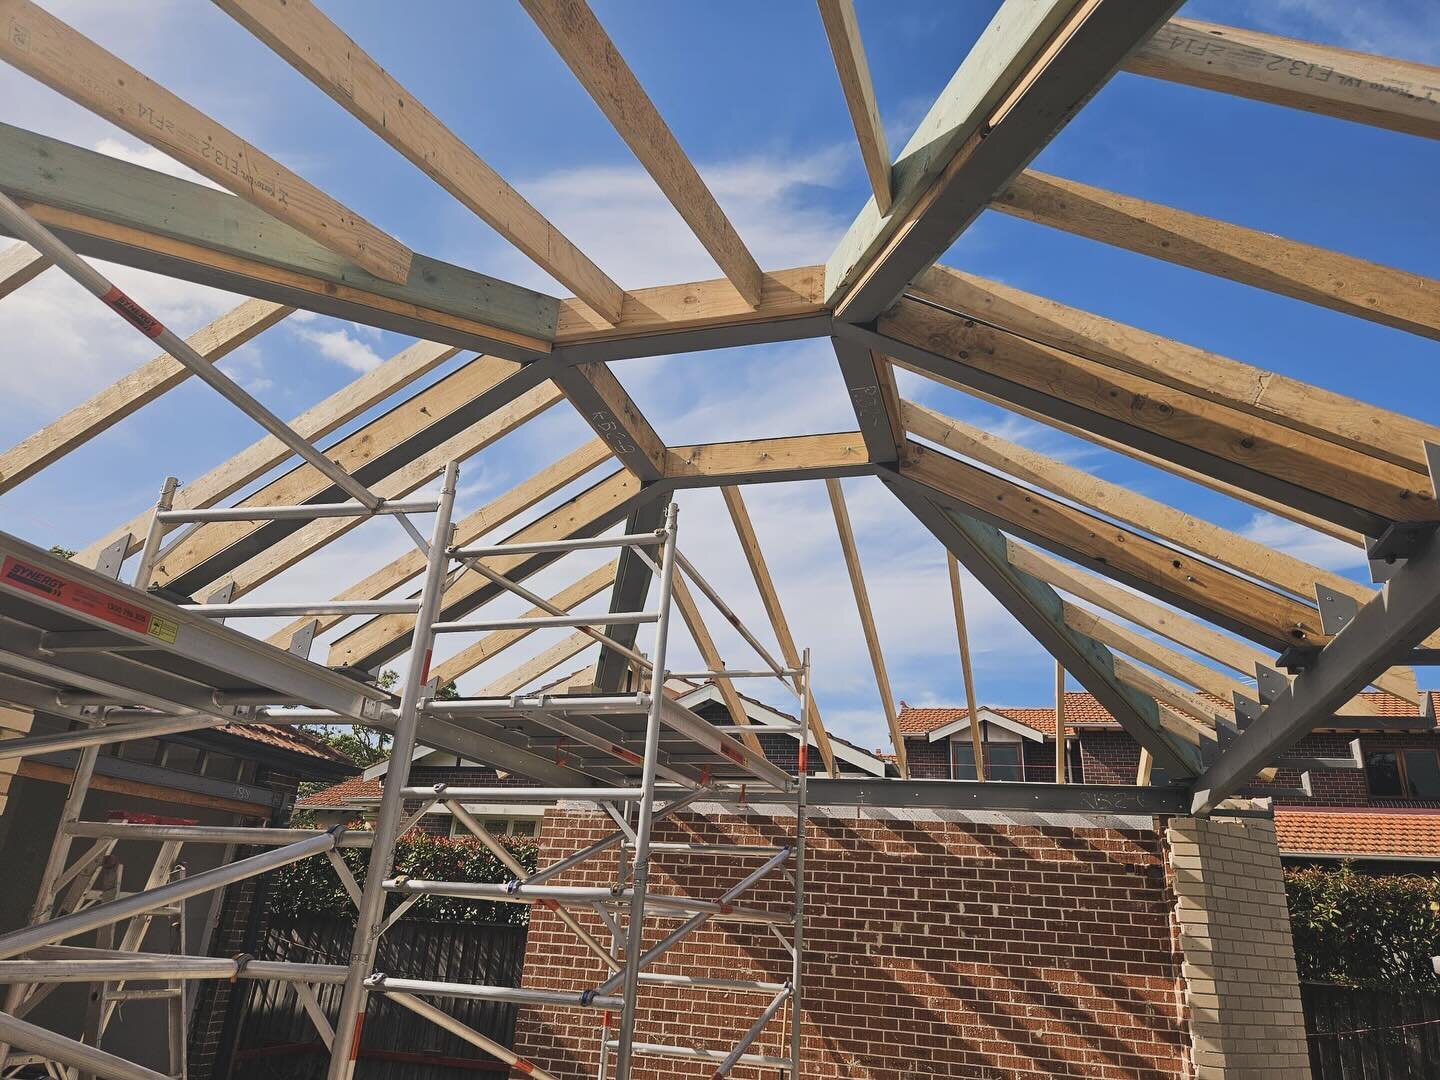 Some roof framing we finished recently for one of our clients. This one took a bit of thinking but it turned out great in the end.